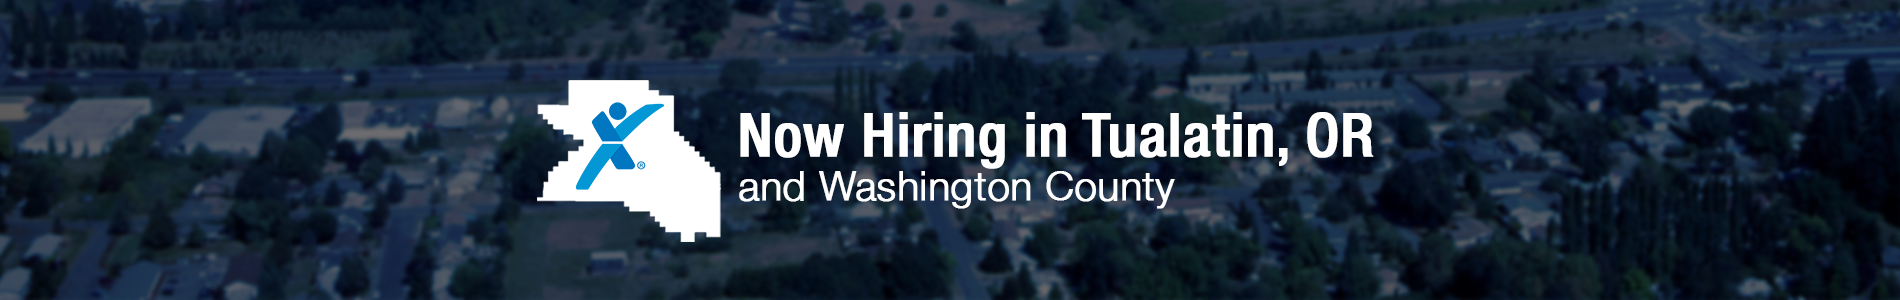 Now Hiring in Tualatin, OR - Apply today!